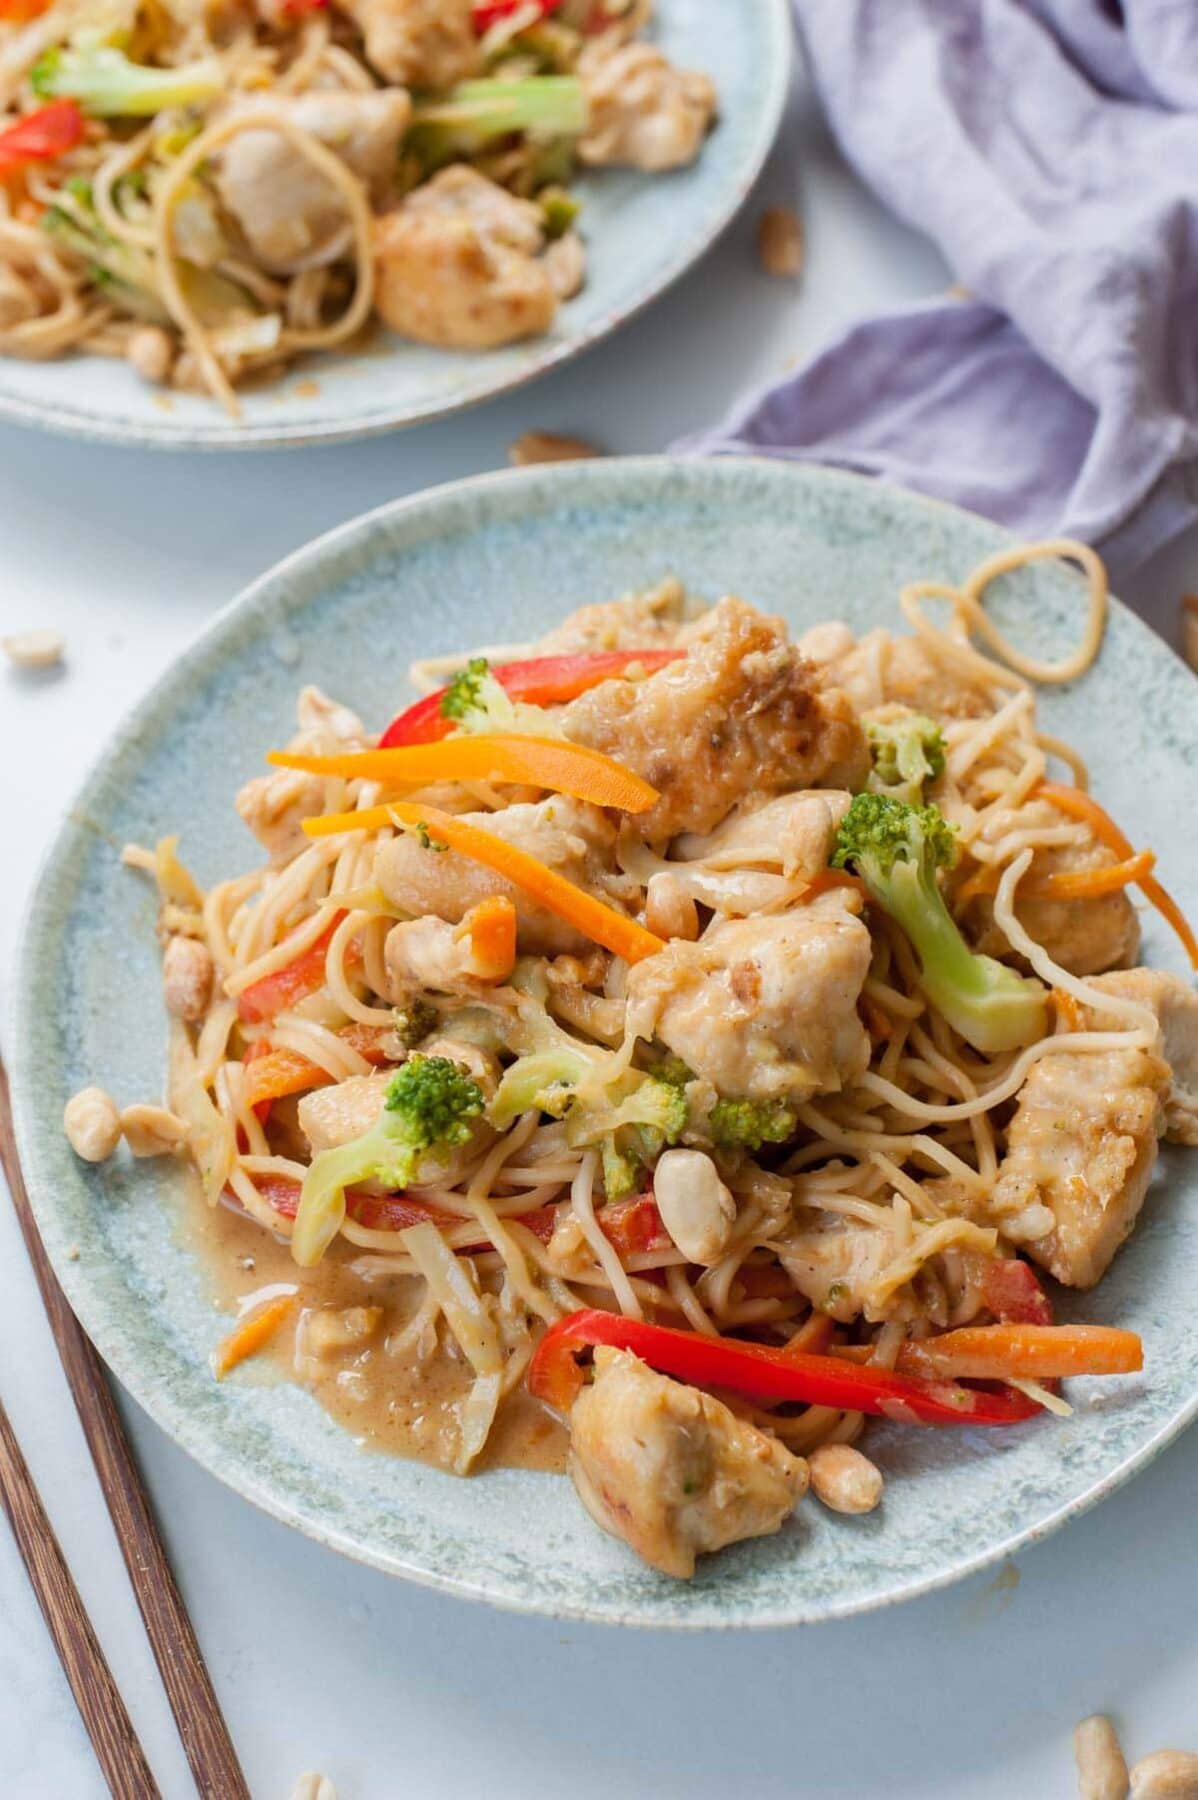 Peanut chicken noodles with vegetables and peanuts on a green plate